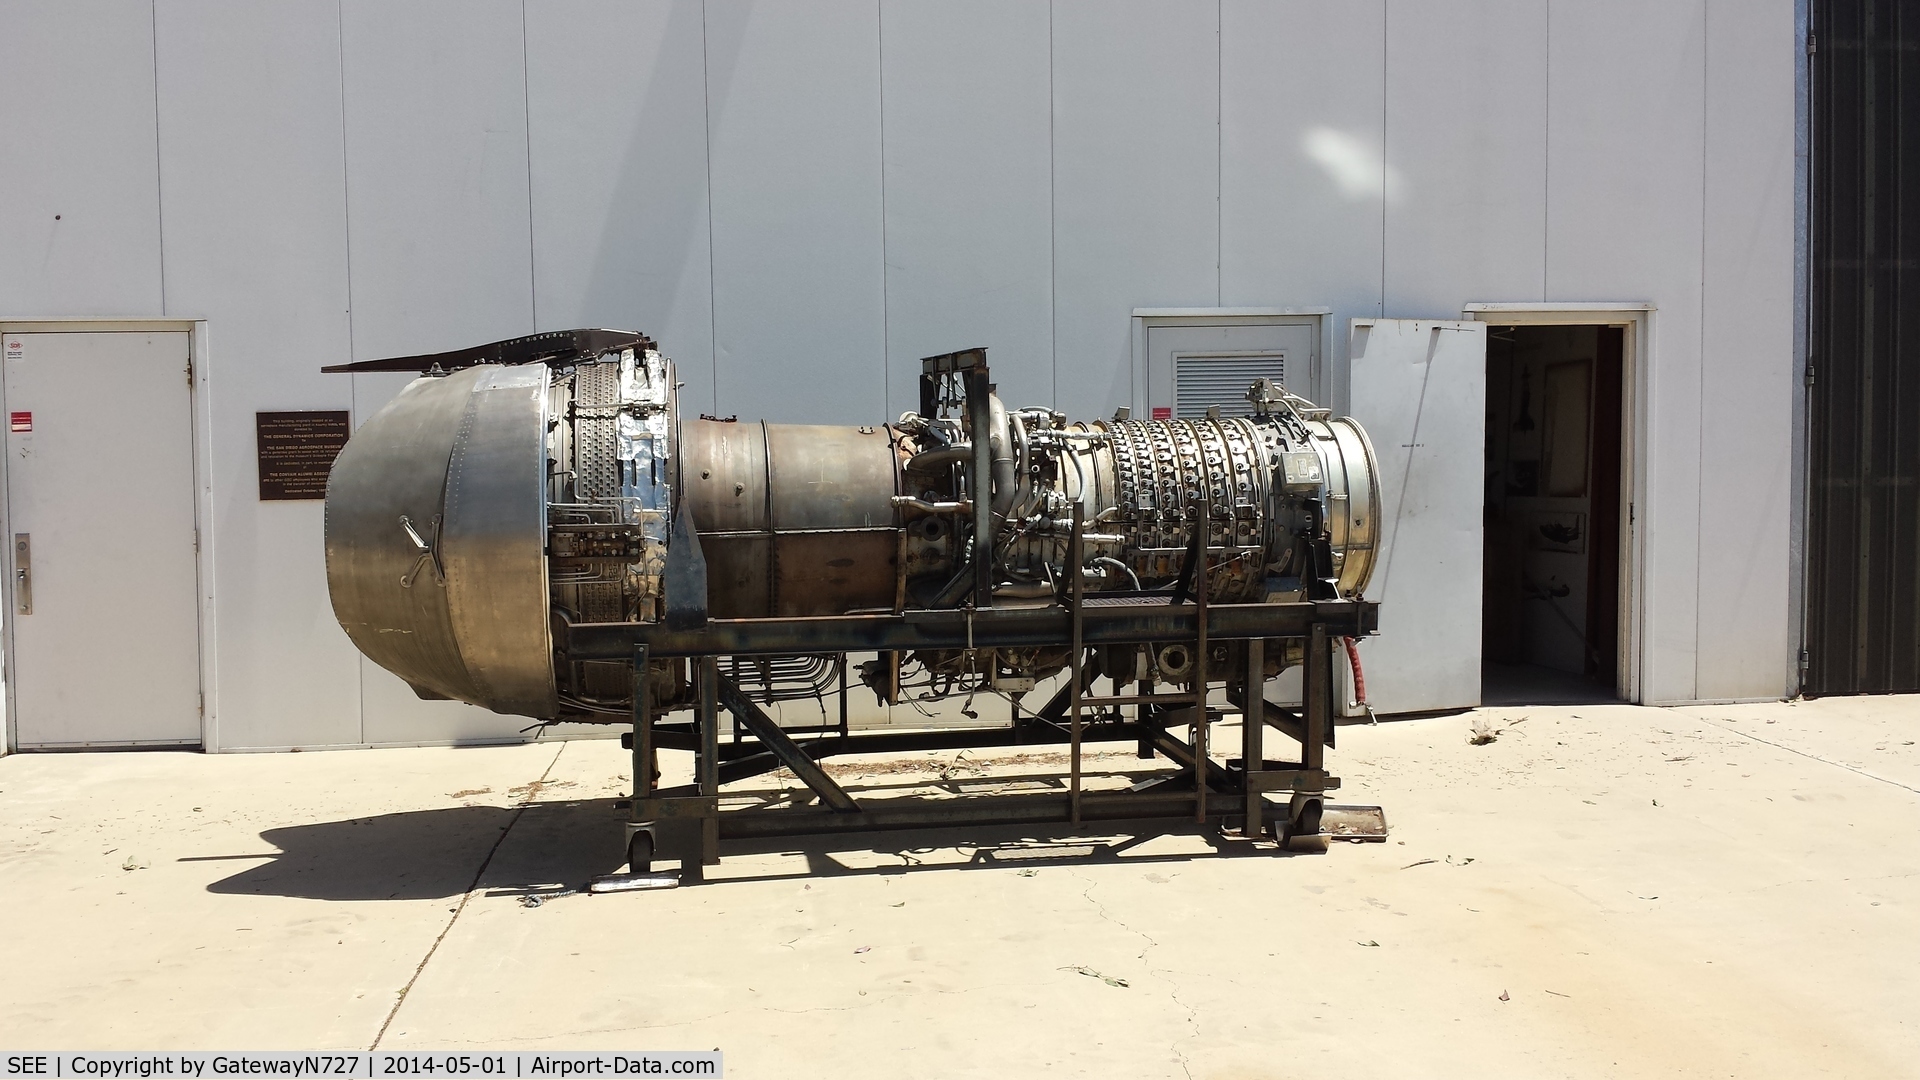 Gillespie Field Airport (SEE) - A General Electric CJ805-23B on display at the San Diego Air & Space Museum Annex. This Convair 990 aft-fan engine was rescued from a scrap yard at Denver Stapleton Airport in 2014.